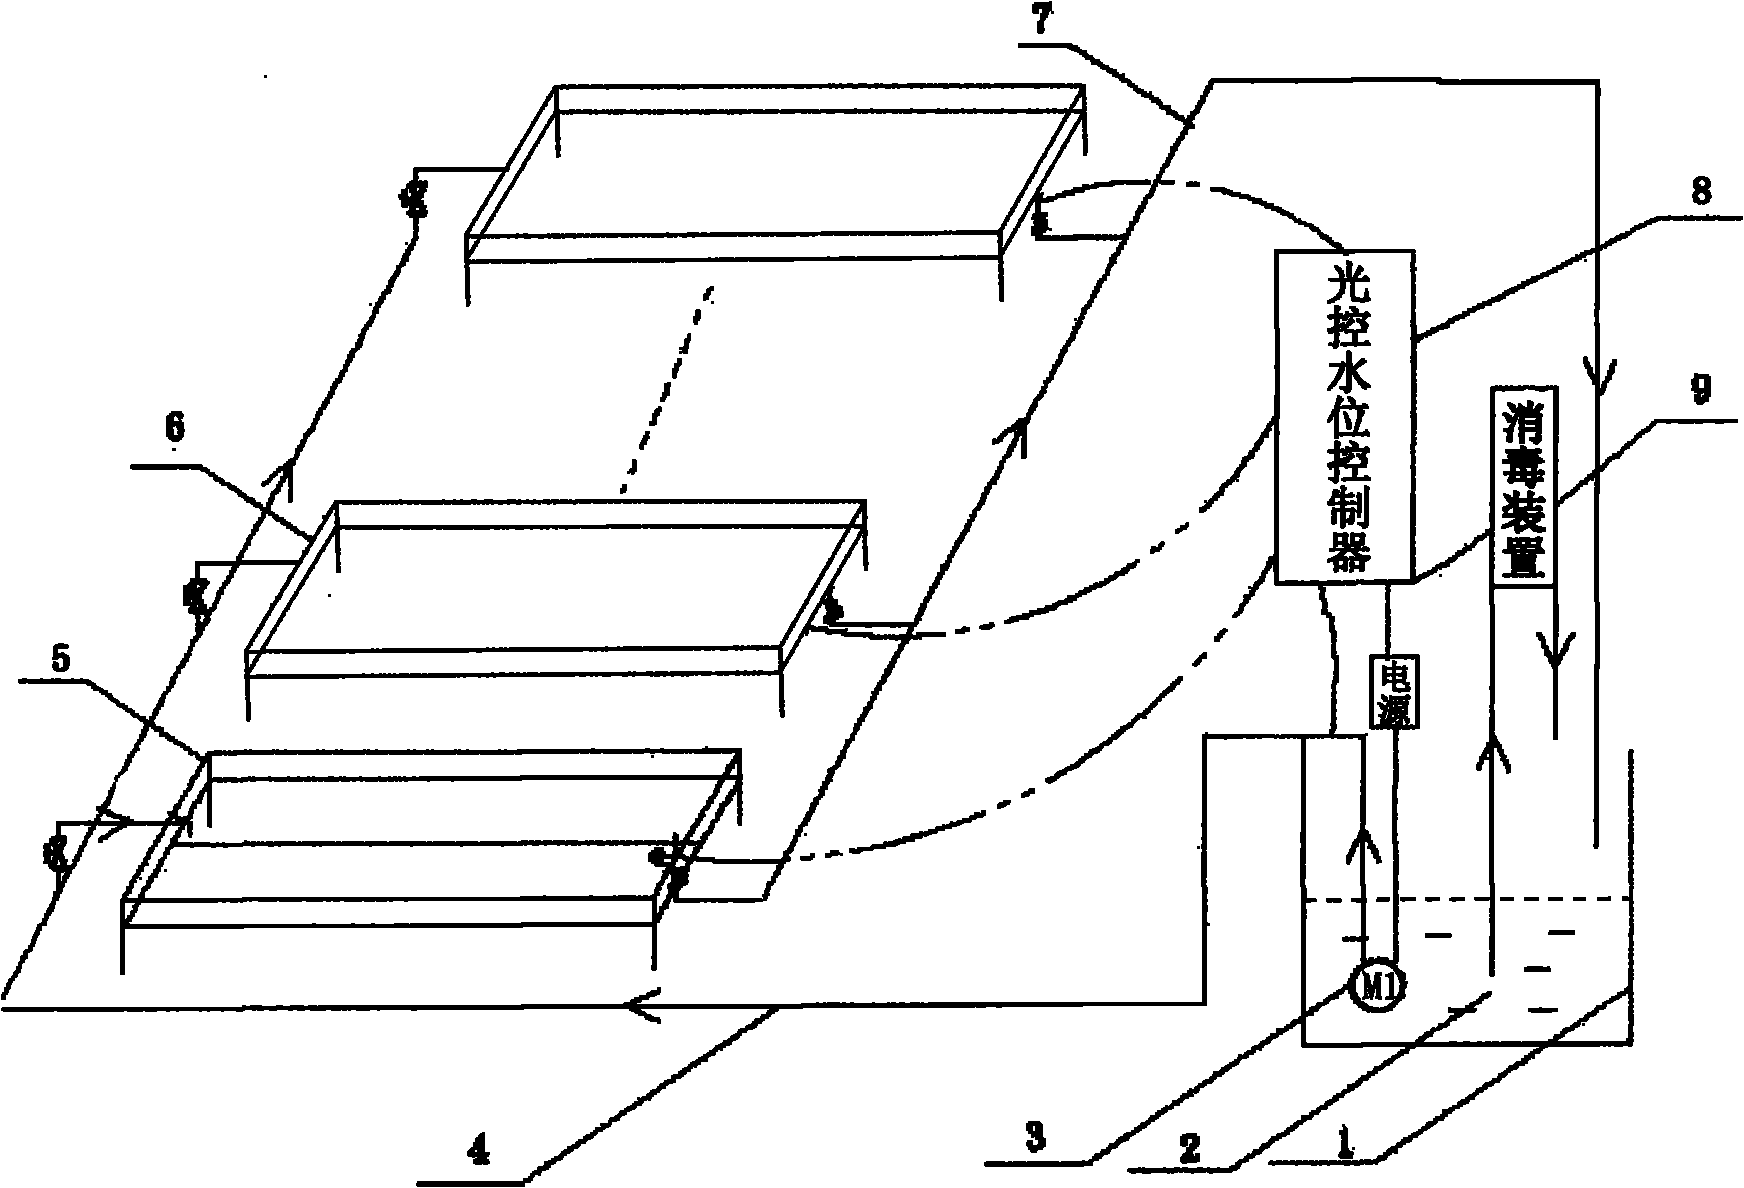 Soilless culture system with light control water level controller